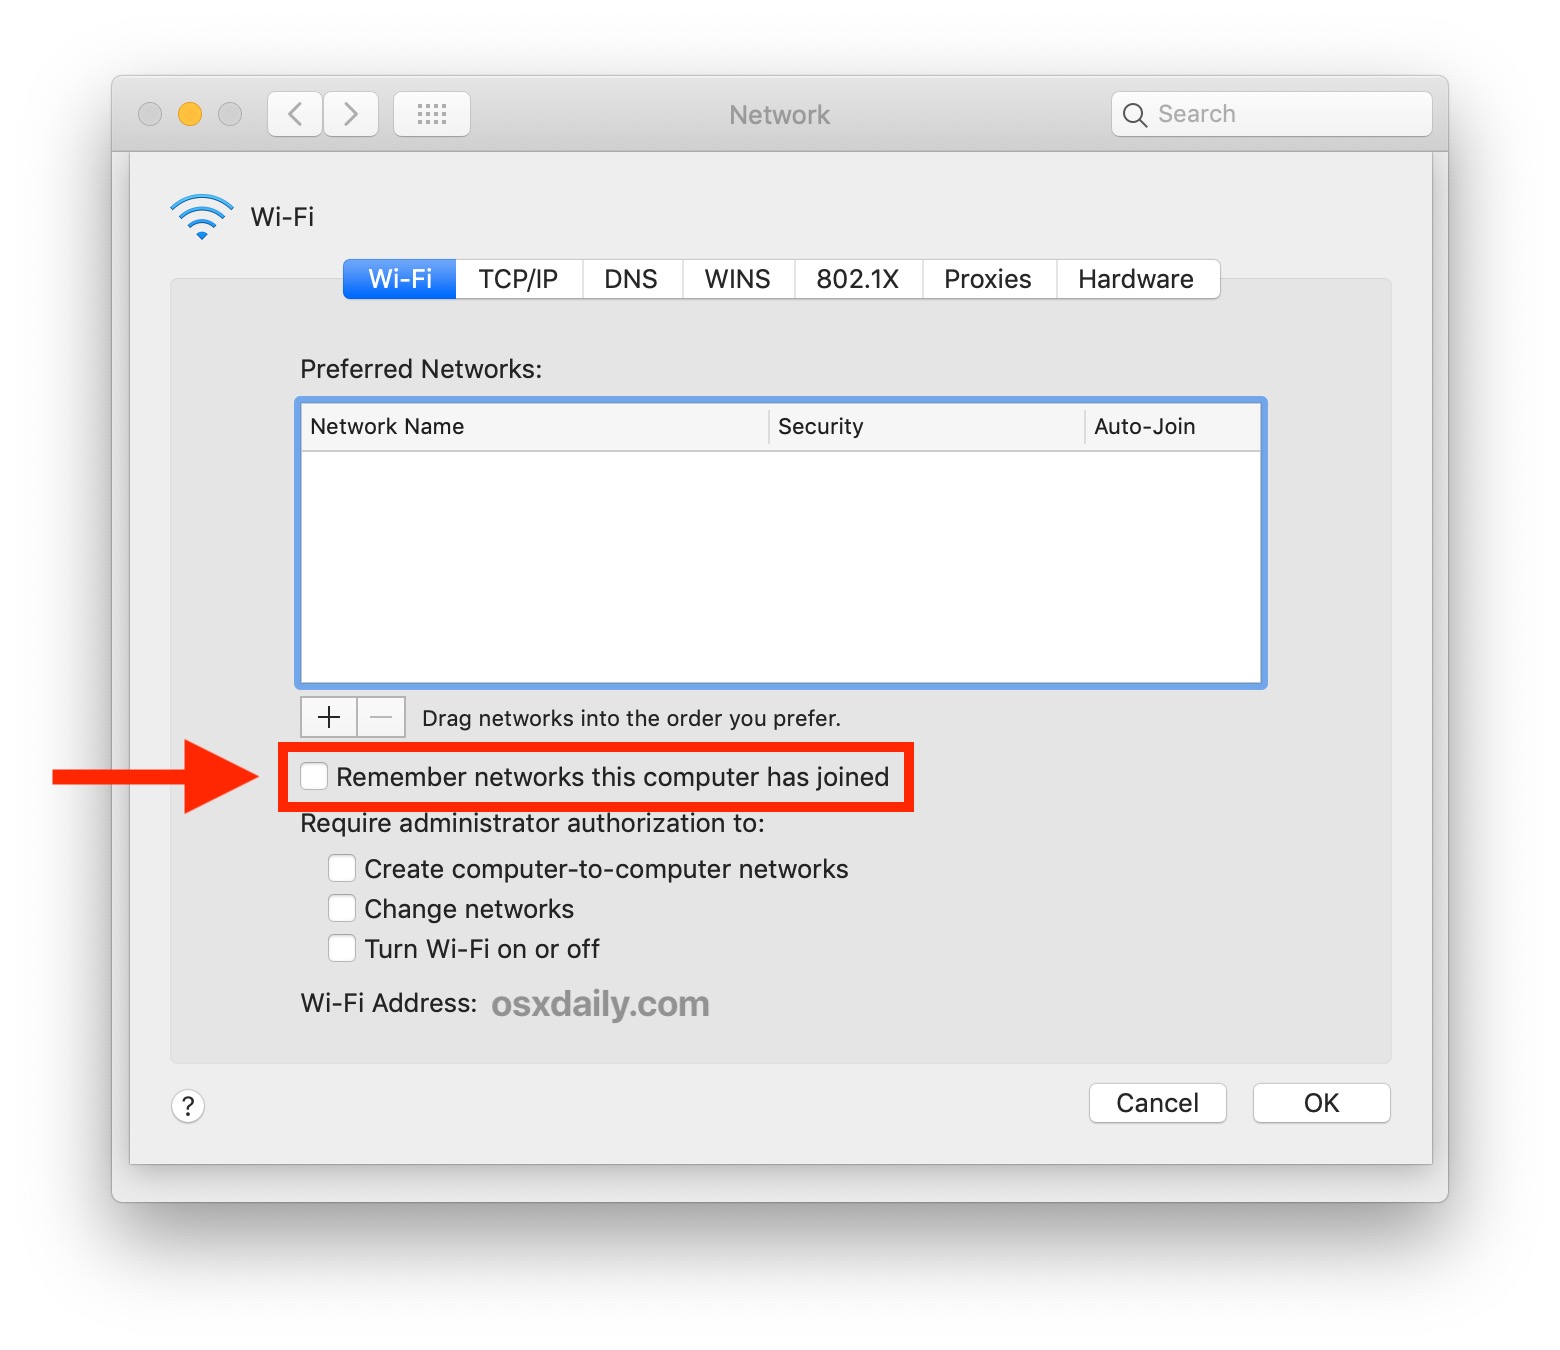 How to Prevent Mac from Remembering Wi-Fi Networks Joined